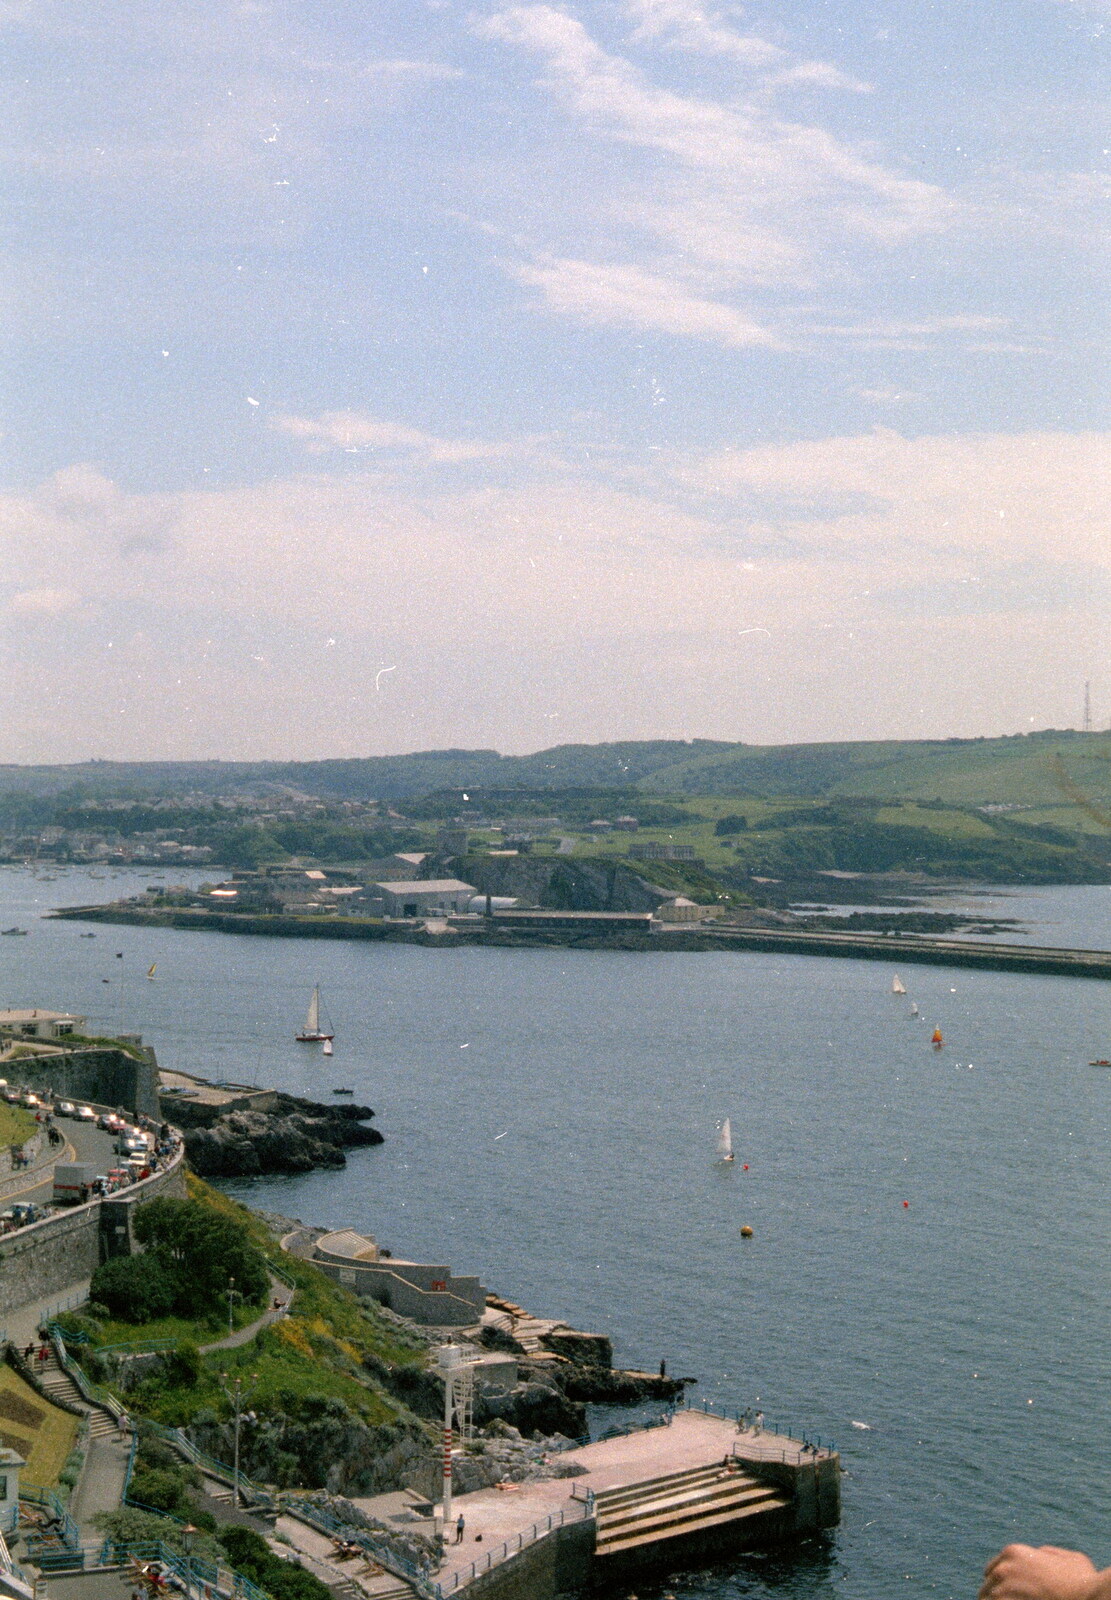 Plymouth Sound and the Mount Batten Centre from Uni: A Plymouth Hoe Panorama, Plymouth, Devon - 7th May 1986